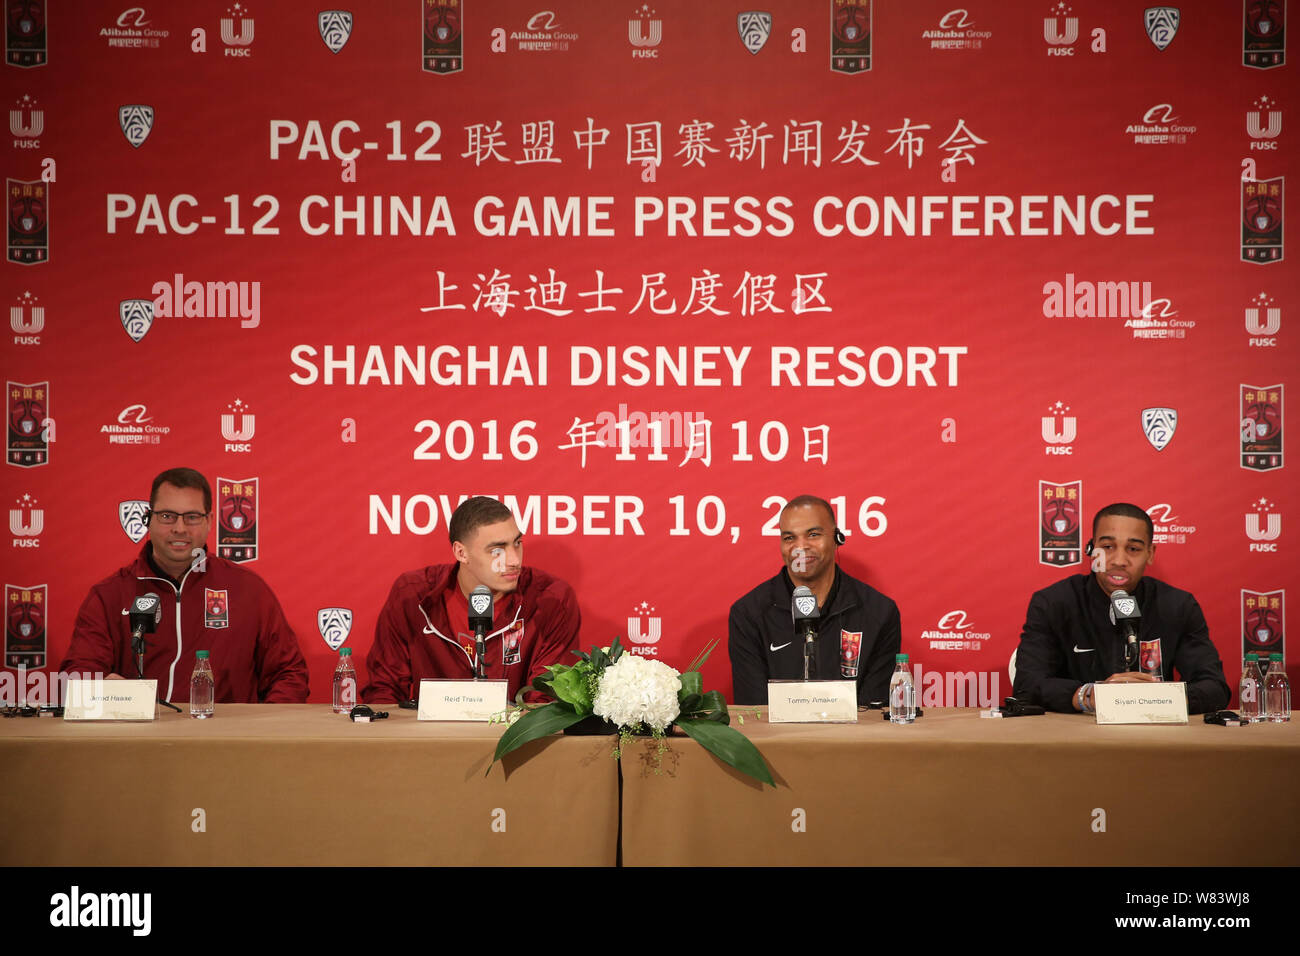 Members of the Pac-12 China Game delegation attend a press conference at the Shanghai Disney Resort in Shanghai, China, 10 November 2016.   An idea ha Stock Photo